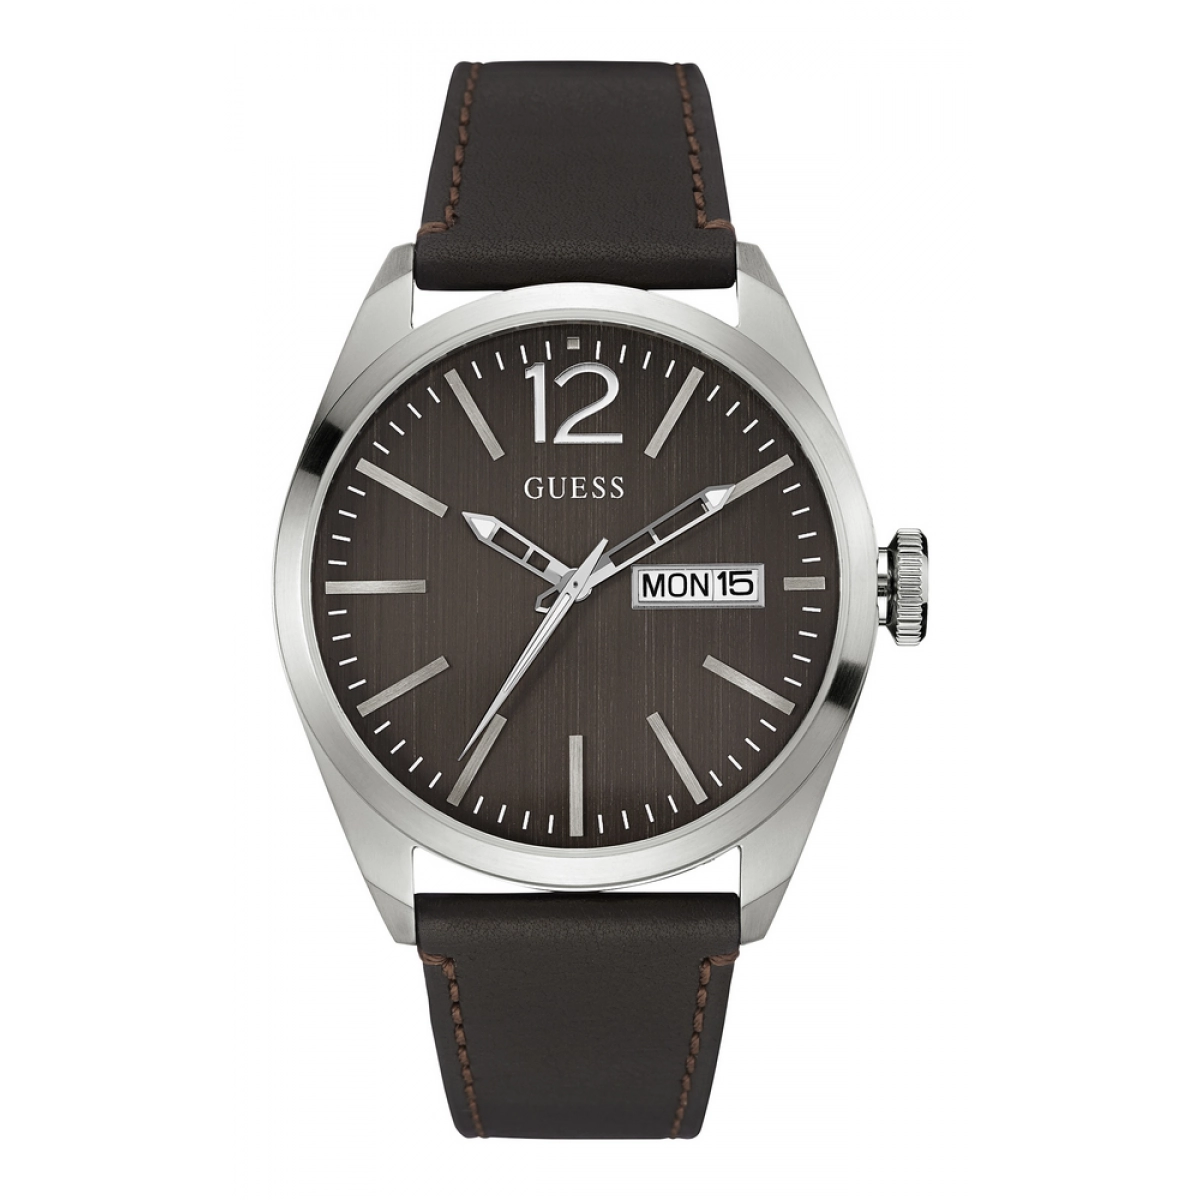 WATCH ANALOG MENS GUESS W0658G3